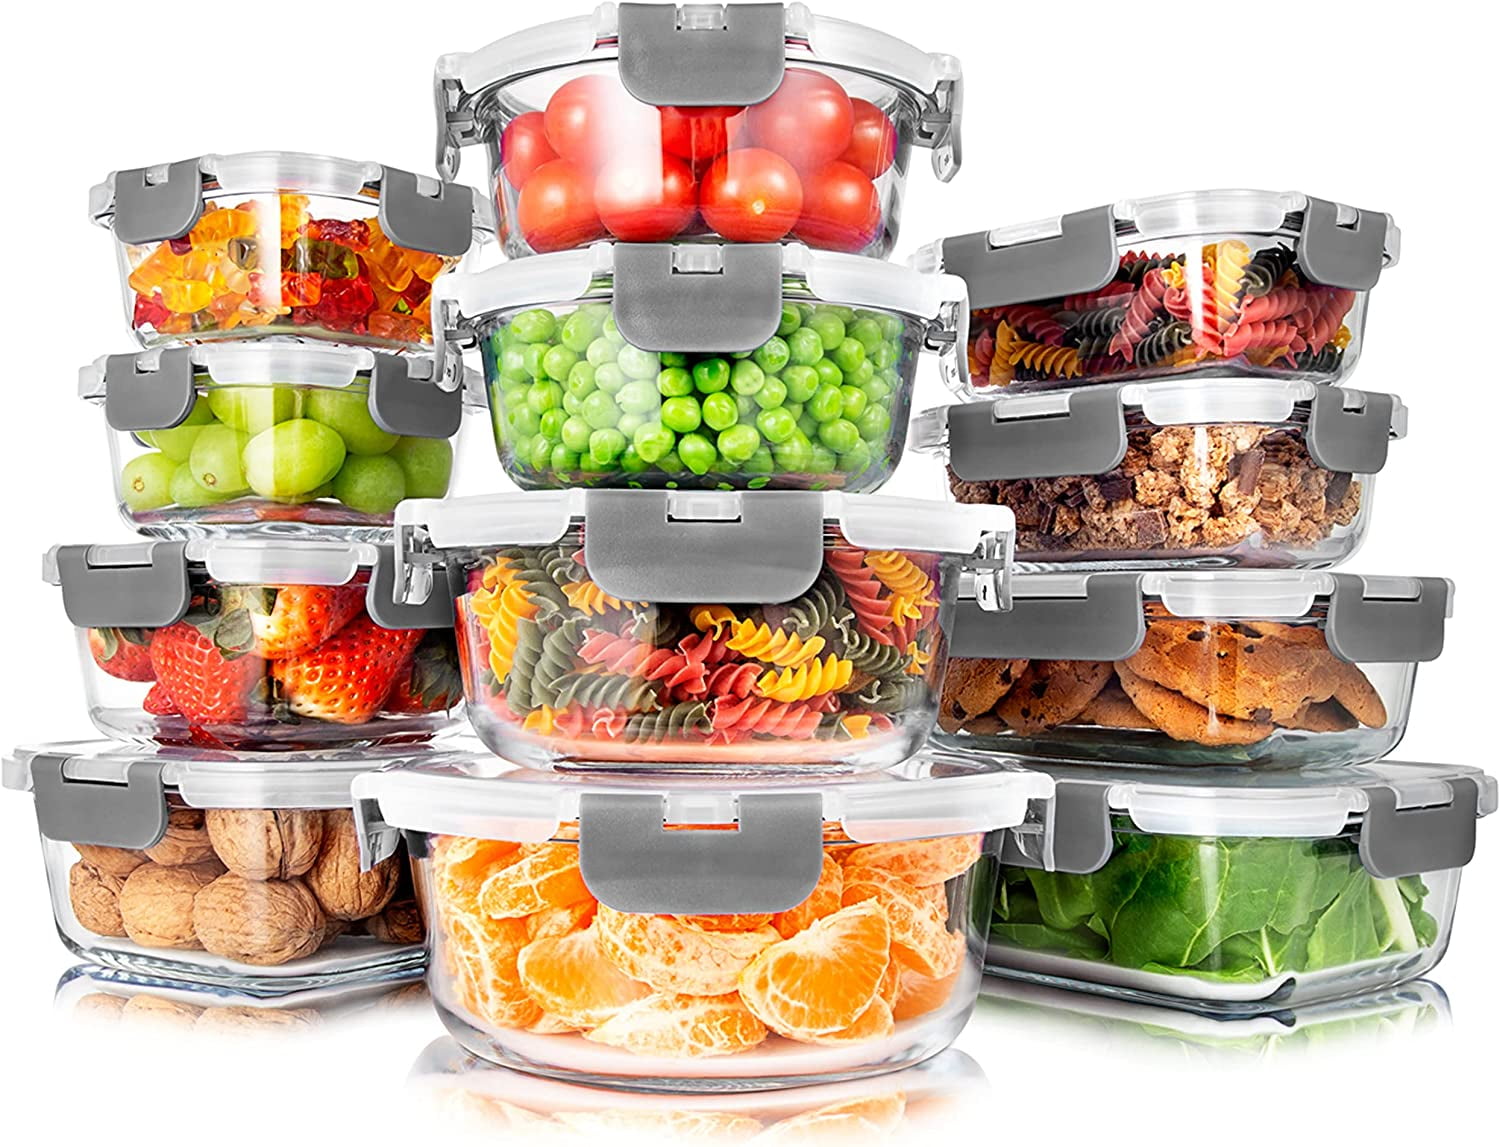  VERONES 24 Pieces Glass Food Storage Containers Set